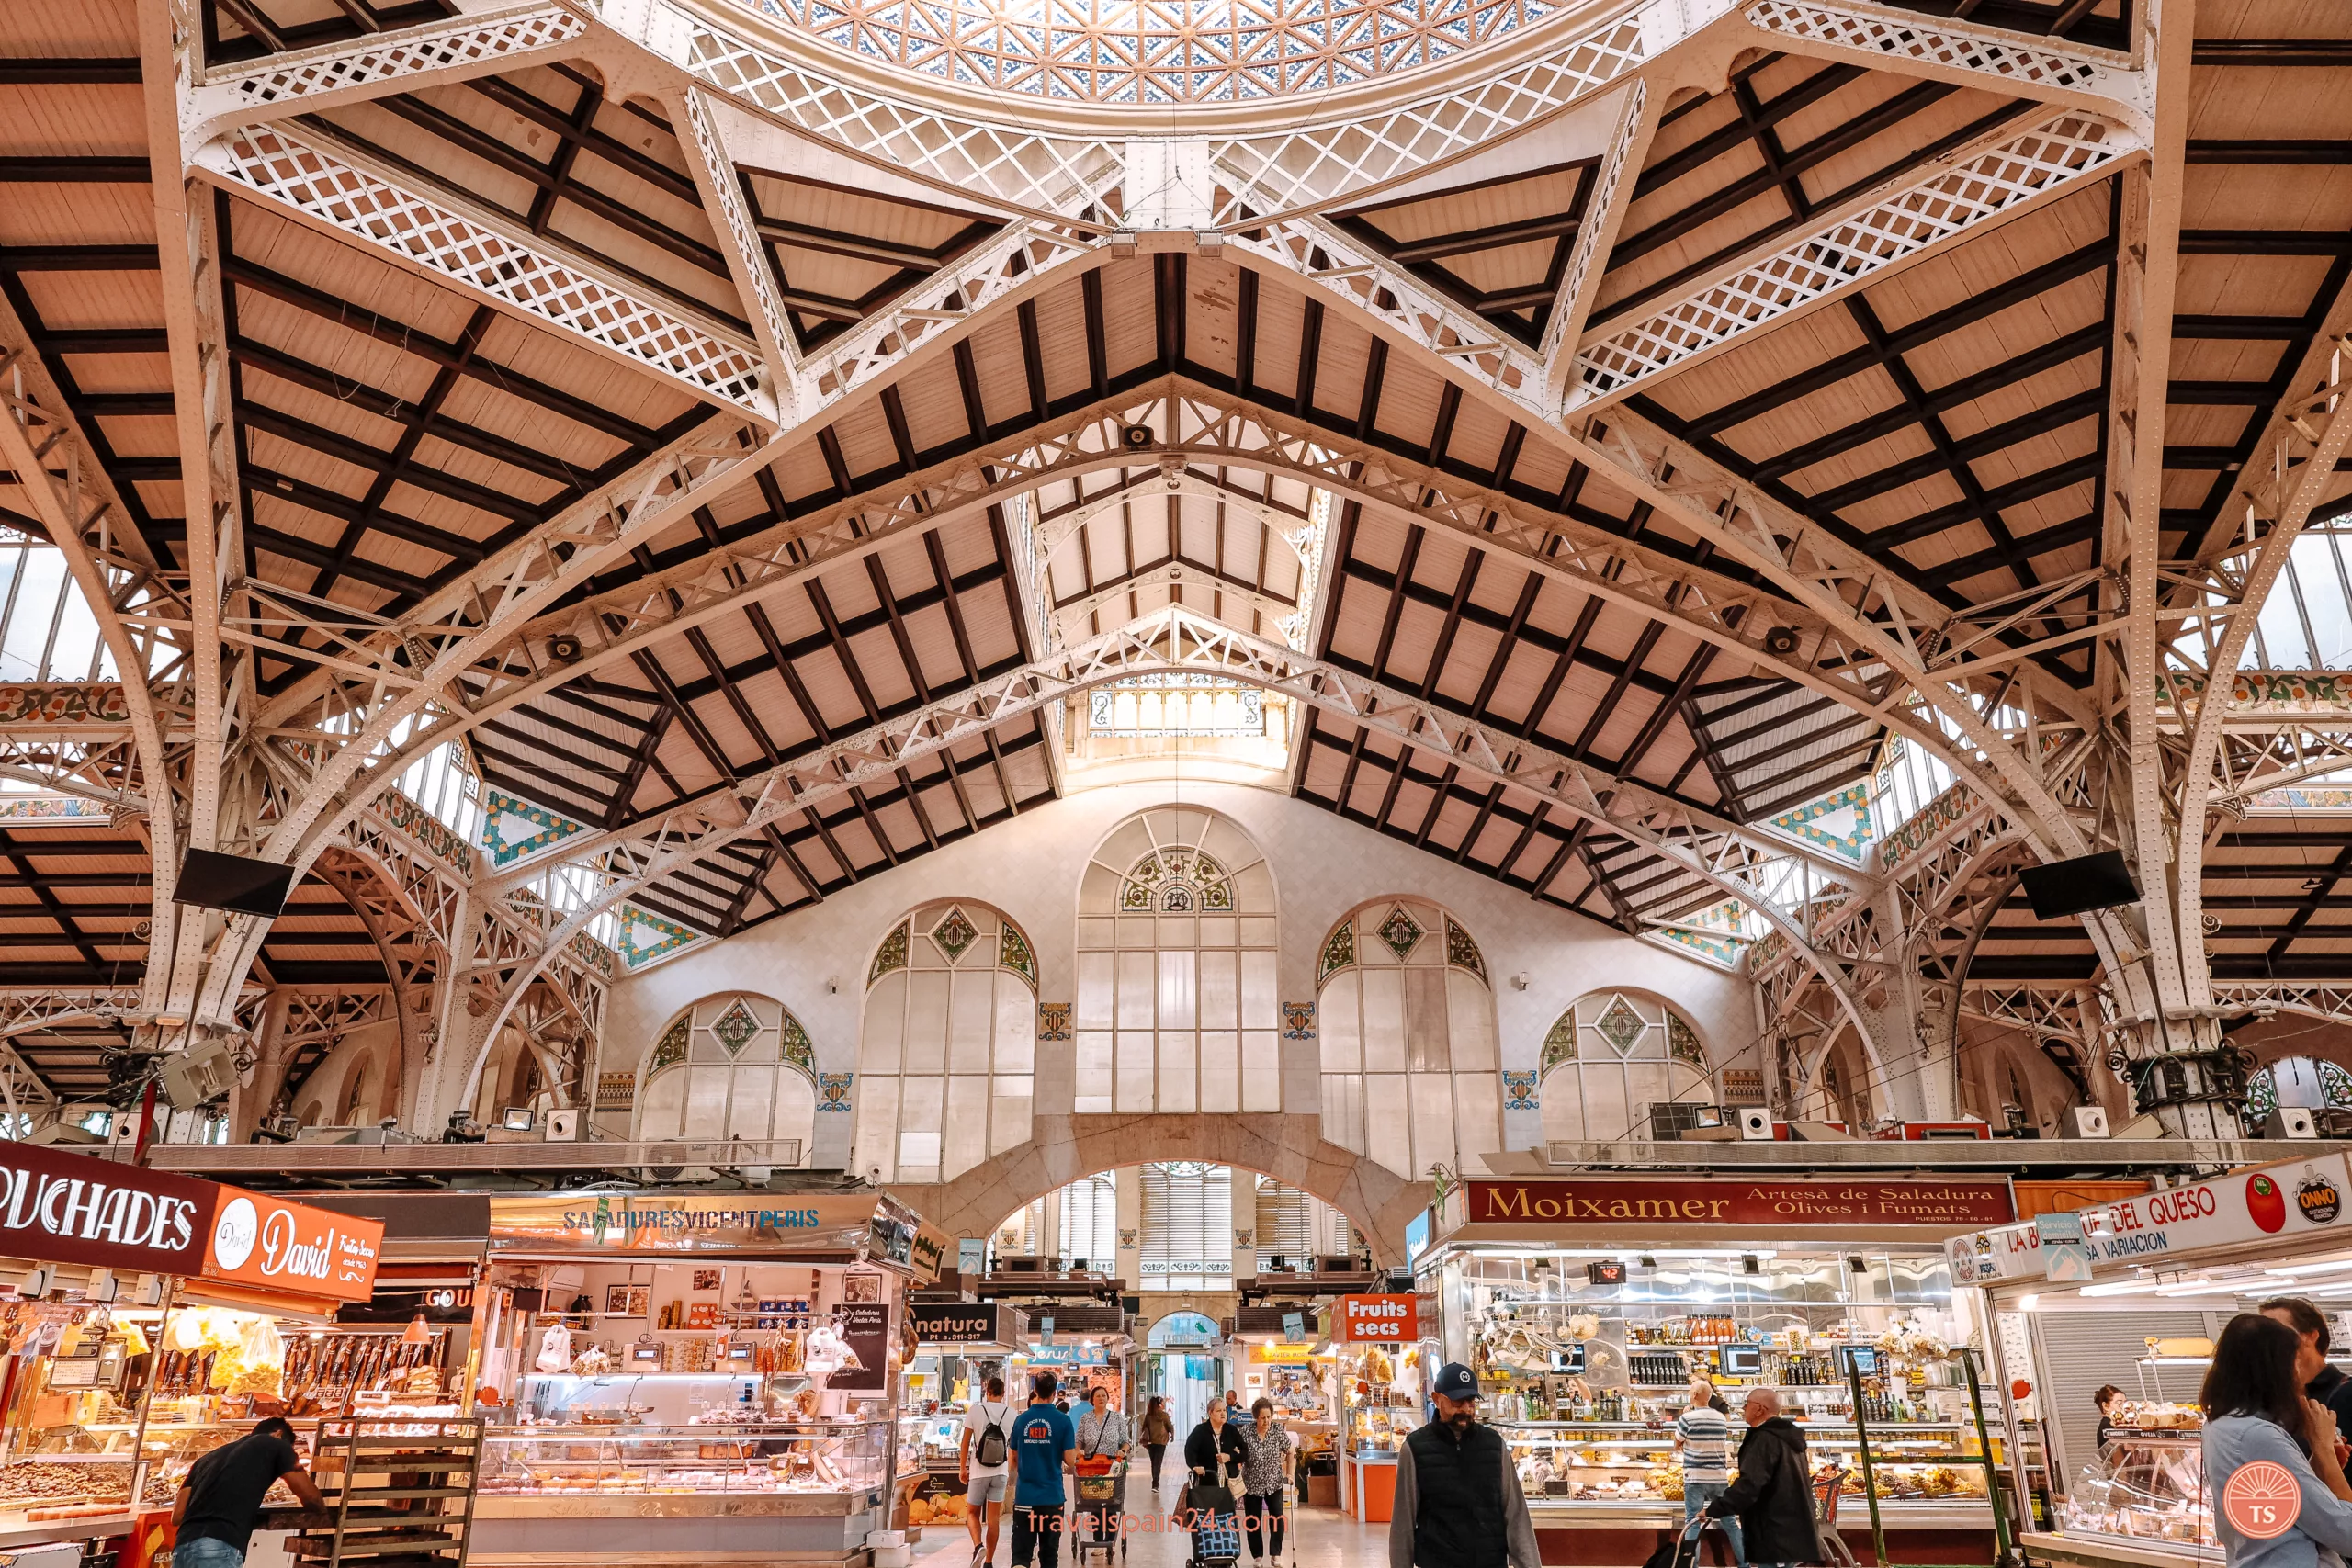 Inside view of the Central Market of Valencia with its special roof, bright walls, sunlight through windows, and market stalls.